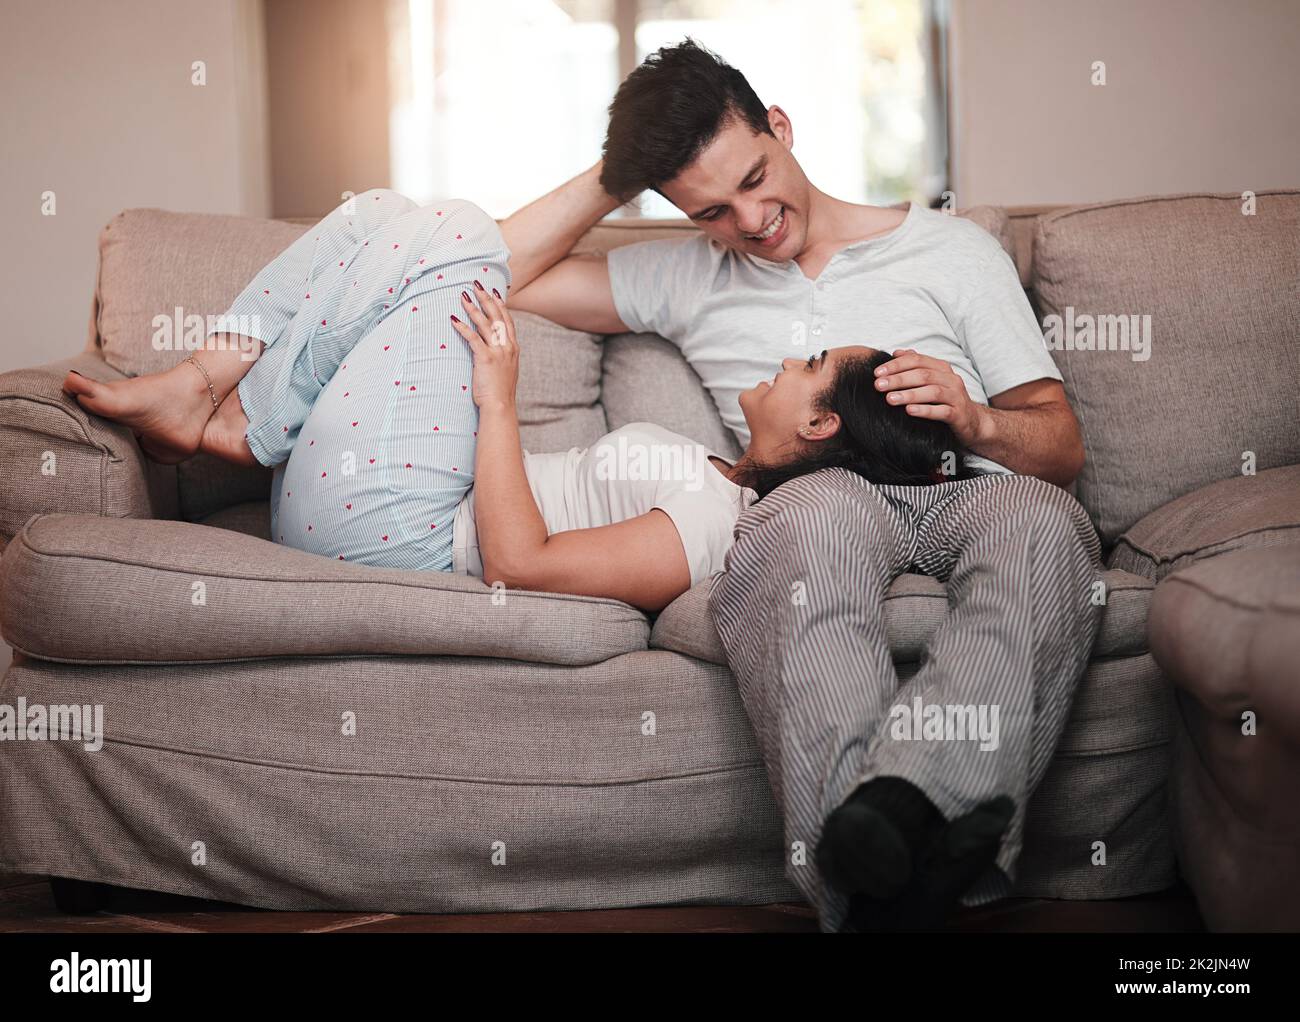 I could stare at you all day. Full length shot of an attractive young woman lying on her boyfriends lap on the living room sofa. Stock Photo